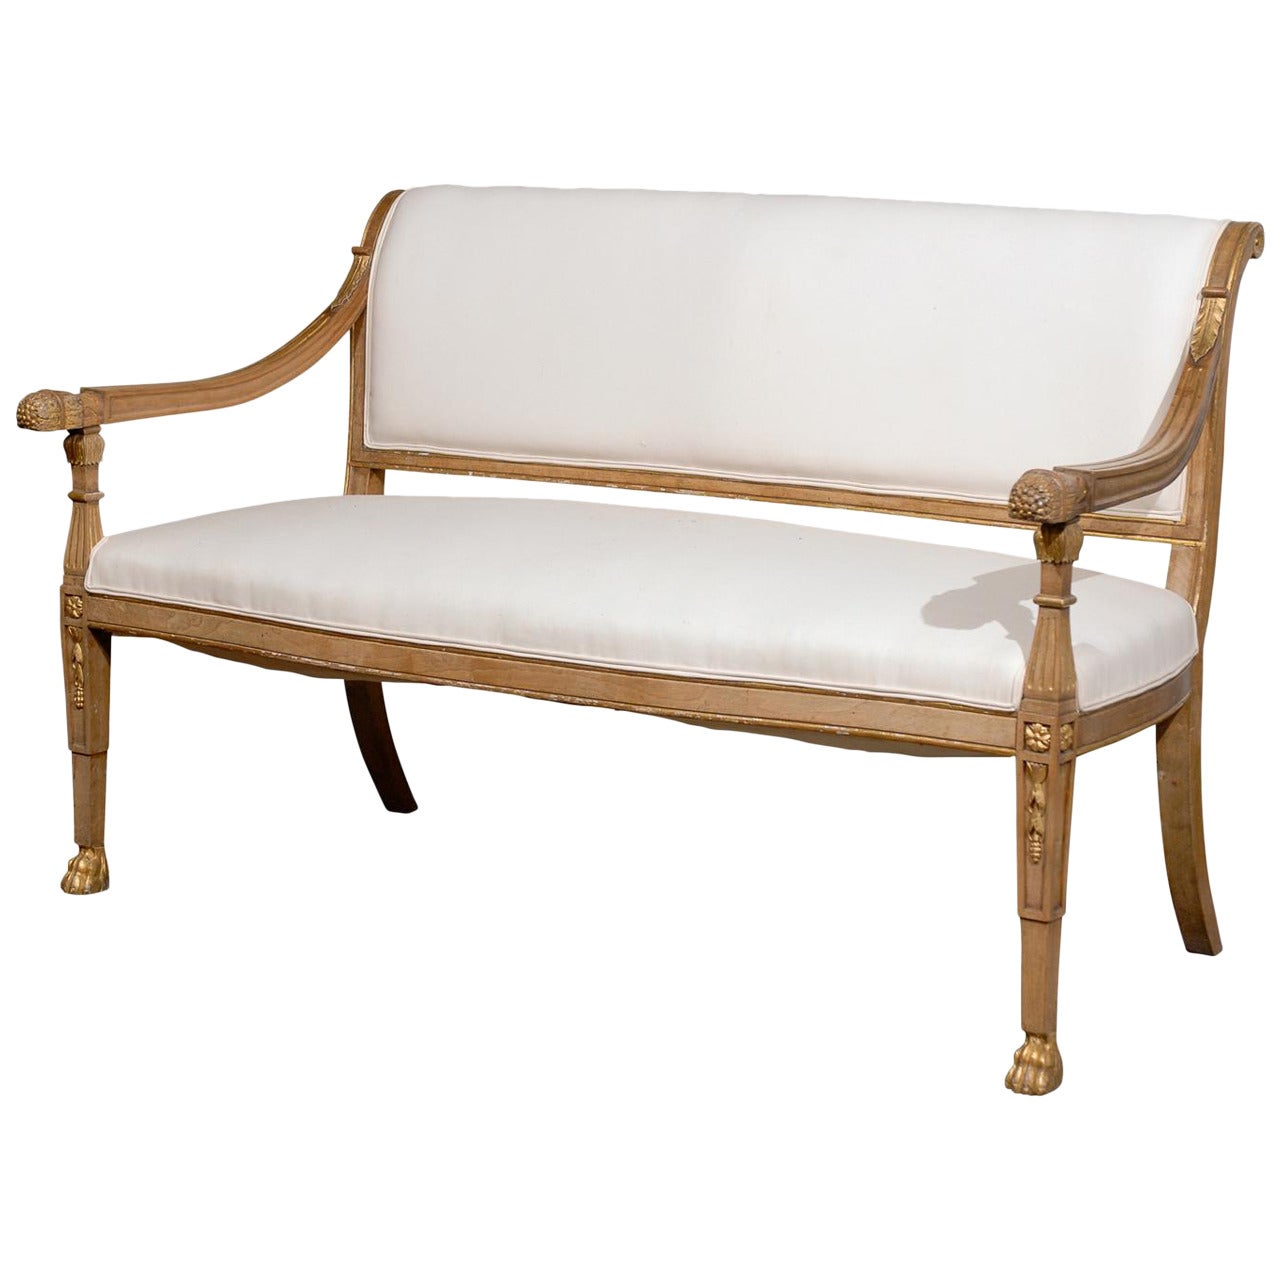 Turn of the Century Italian Upholstered Wooden Settee with Scrolled Back